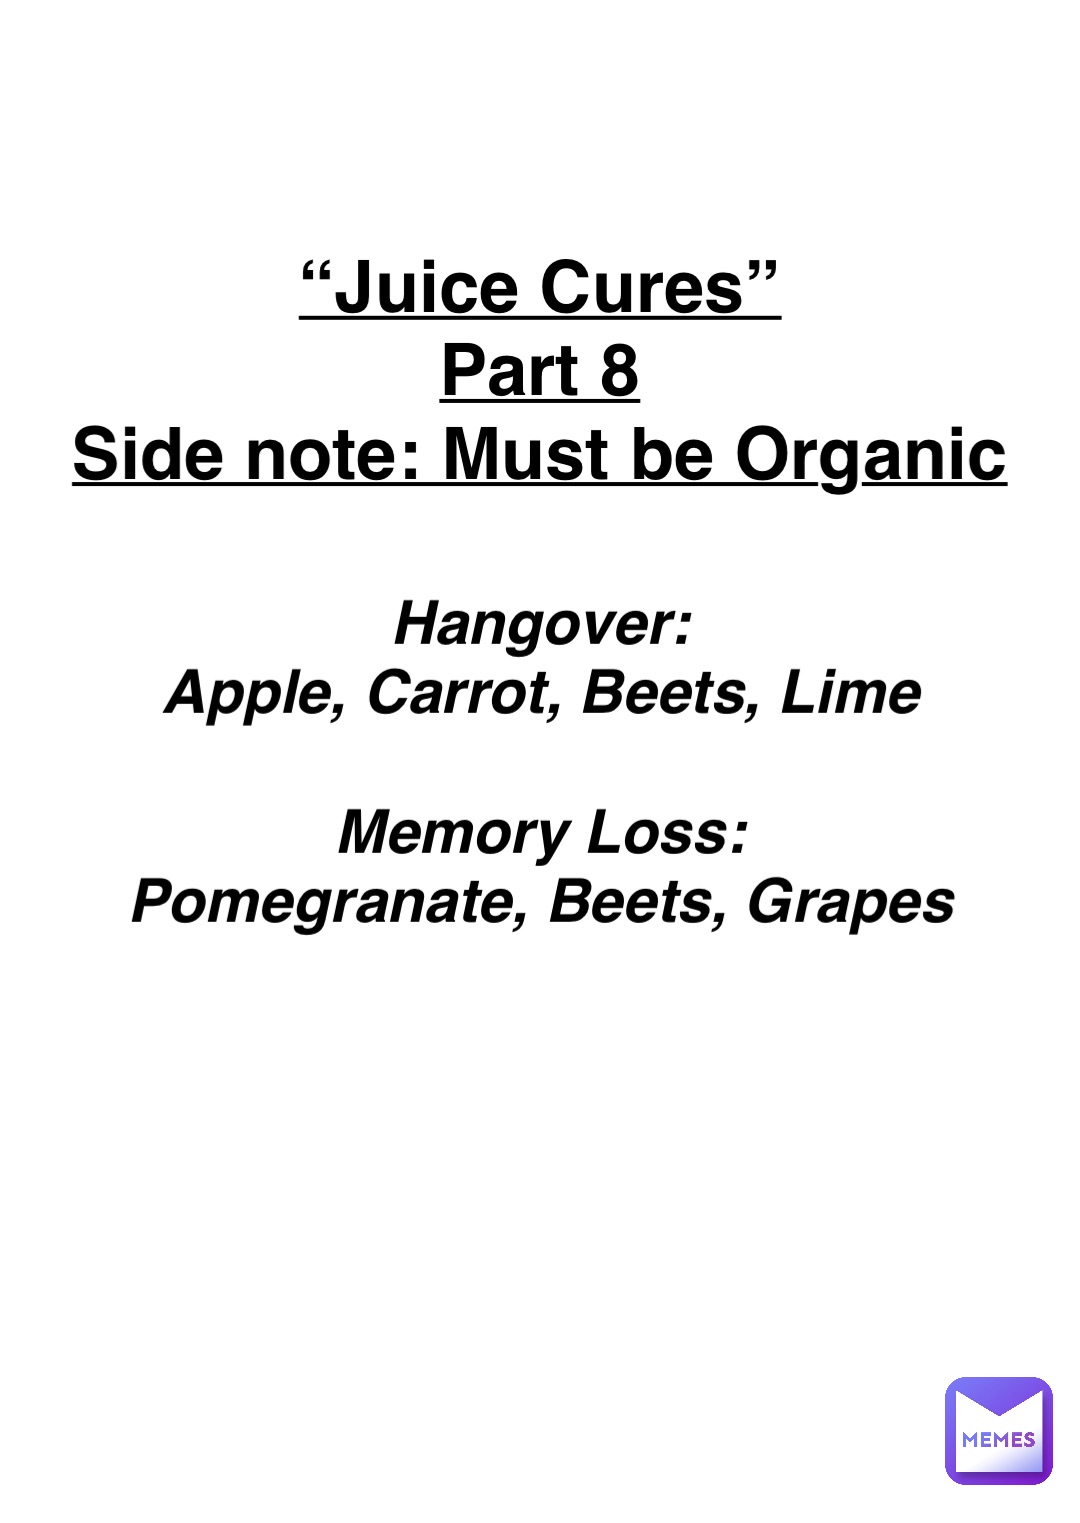 Double tap to edit “Juice Cures”
Part 8
Side note: Must be Organic Hangover:
Apple, Carrot, Beets, Lime

Memory Loss:
Pomegranate, Beets, Grapes